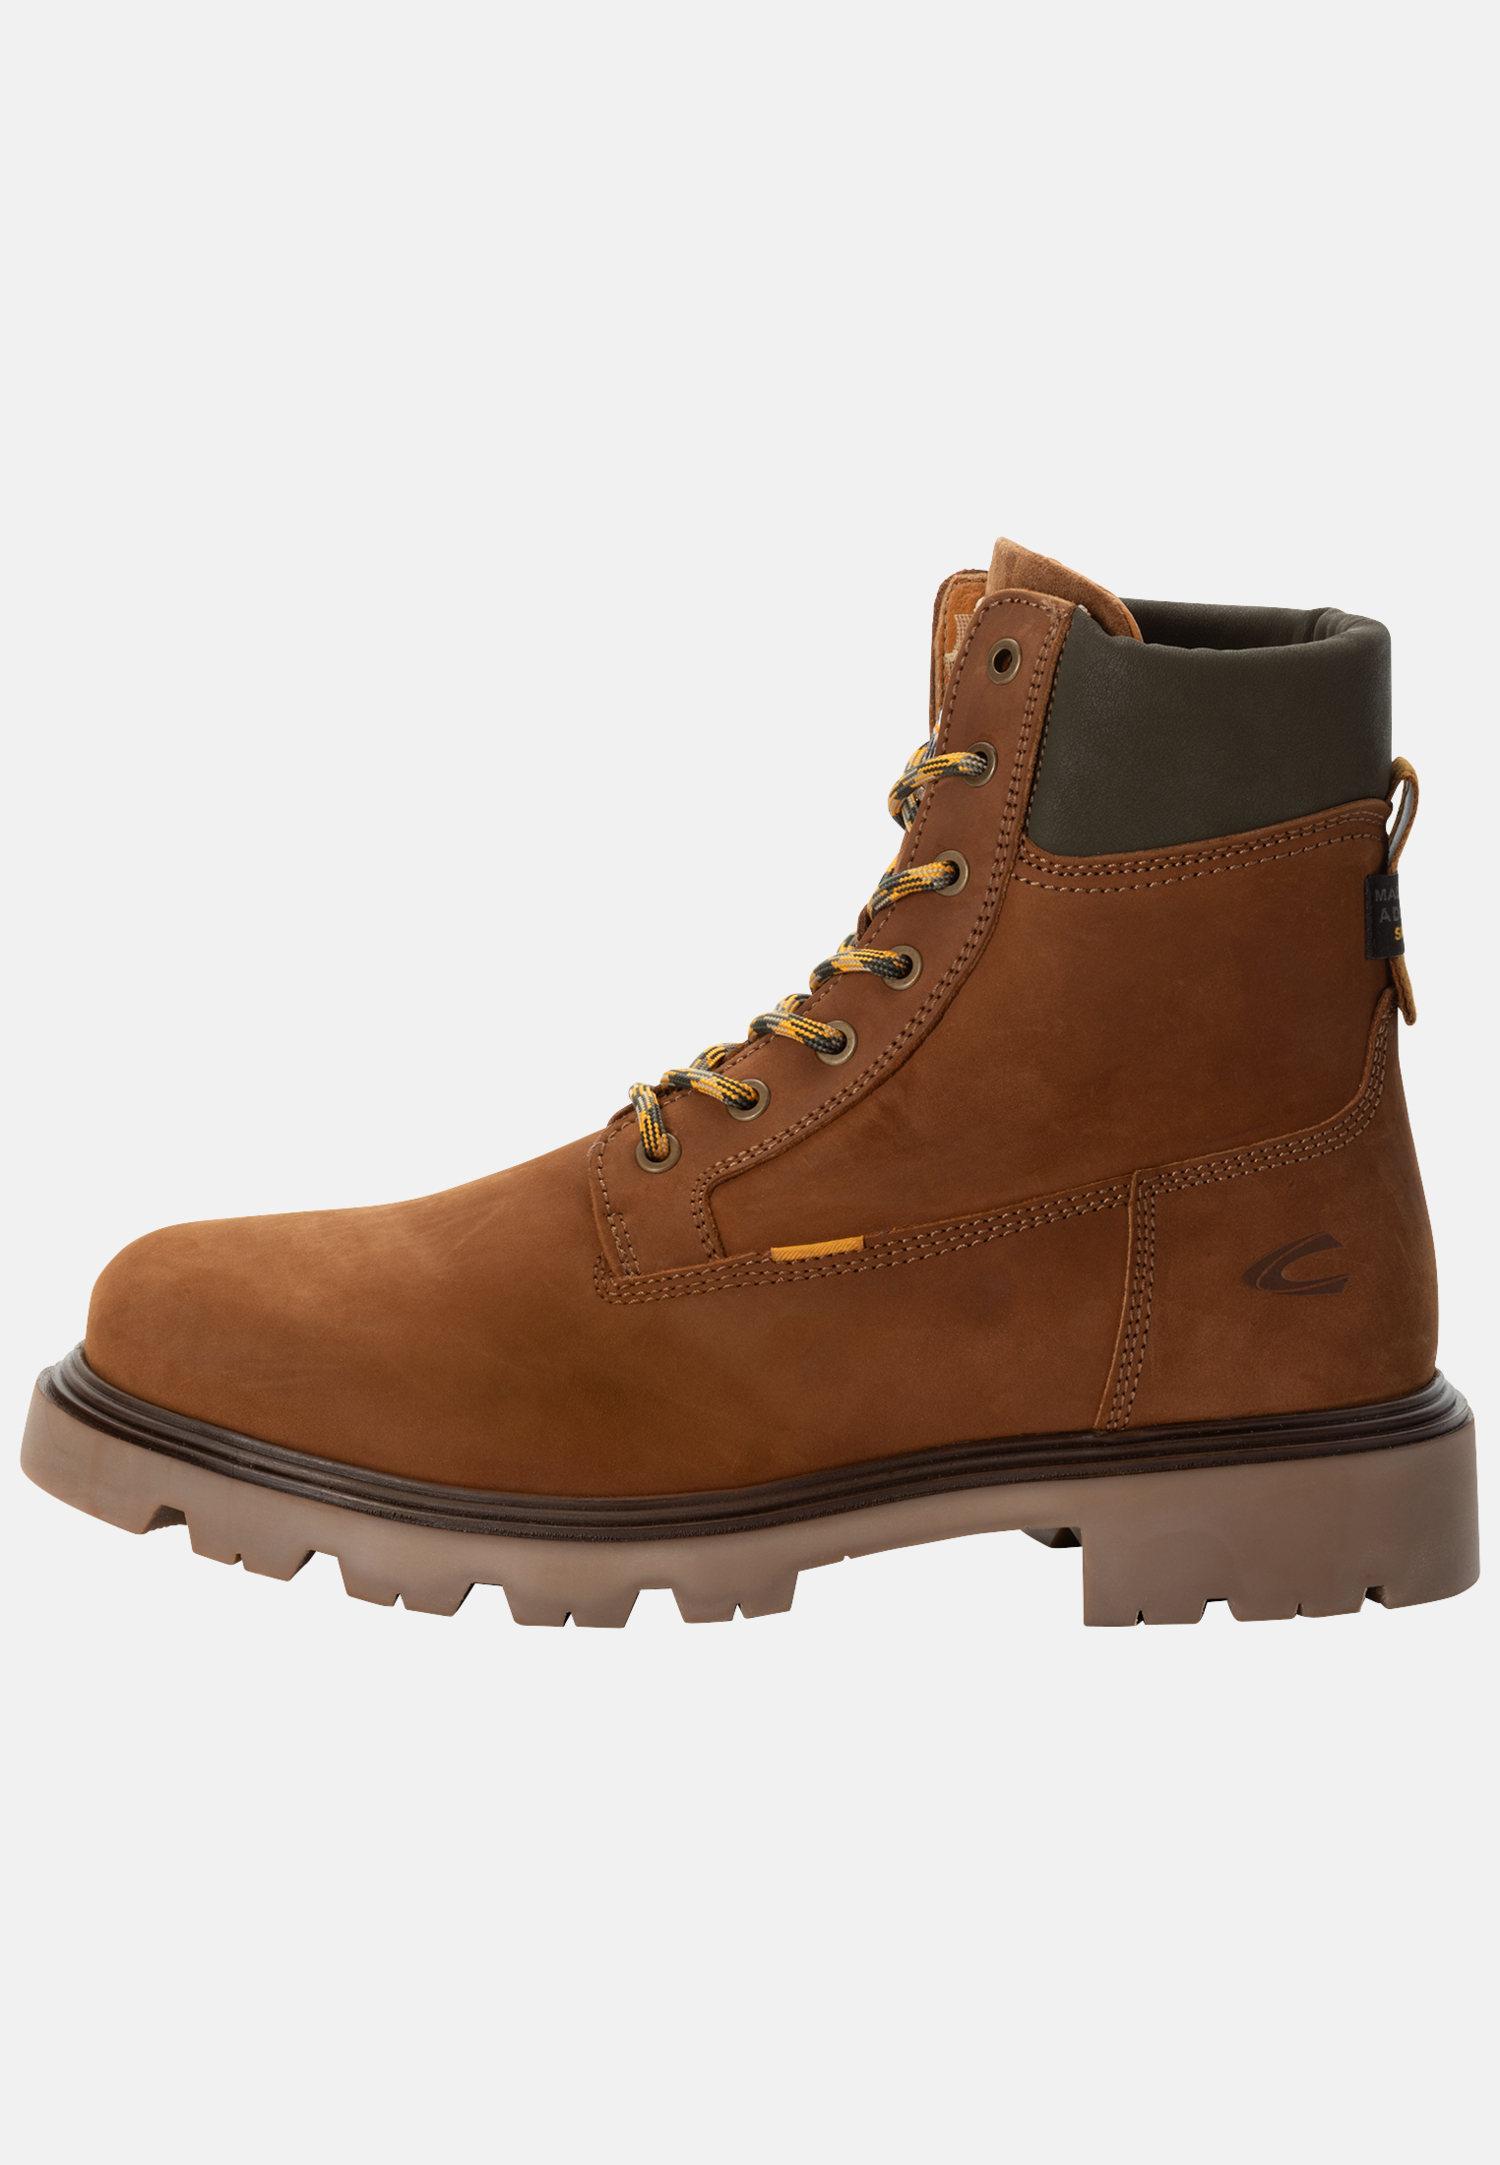 Camel Active High winter boot made of genuine leather